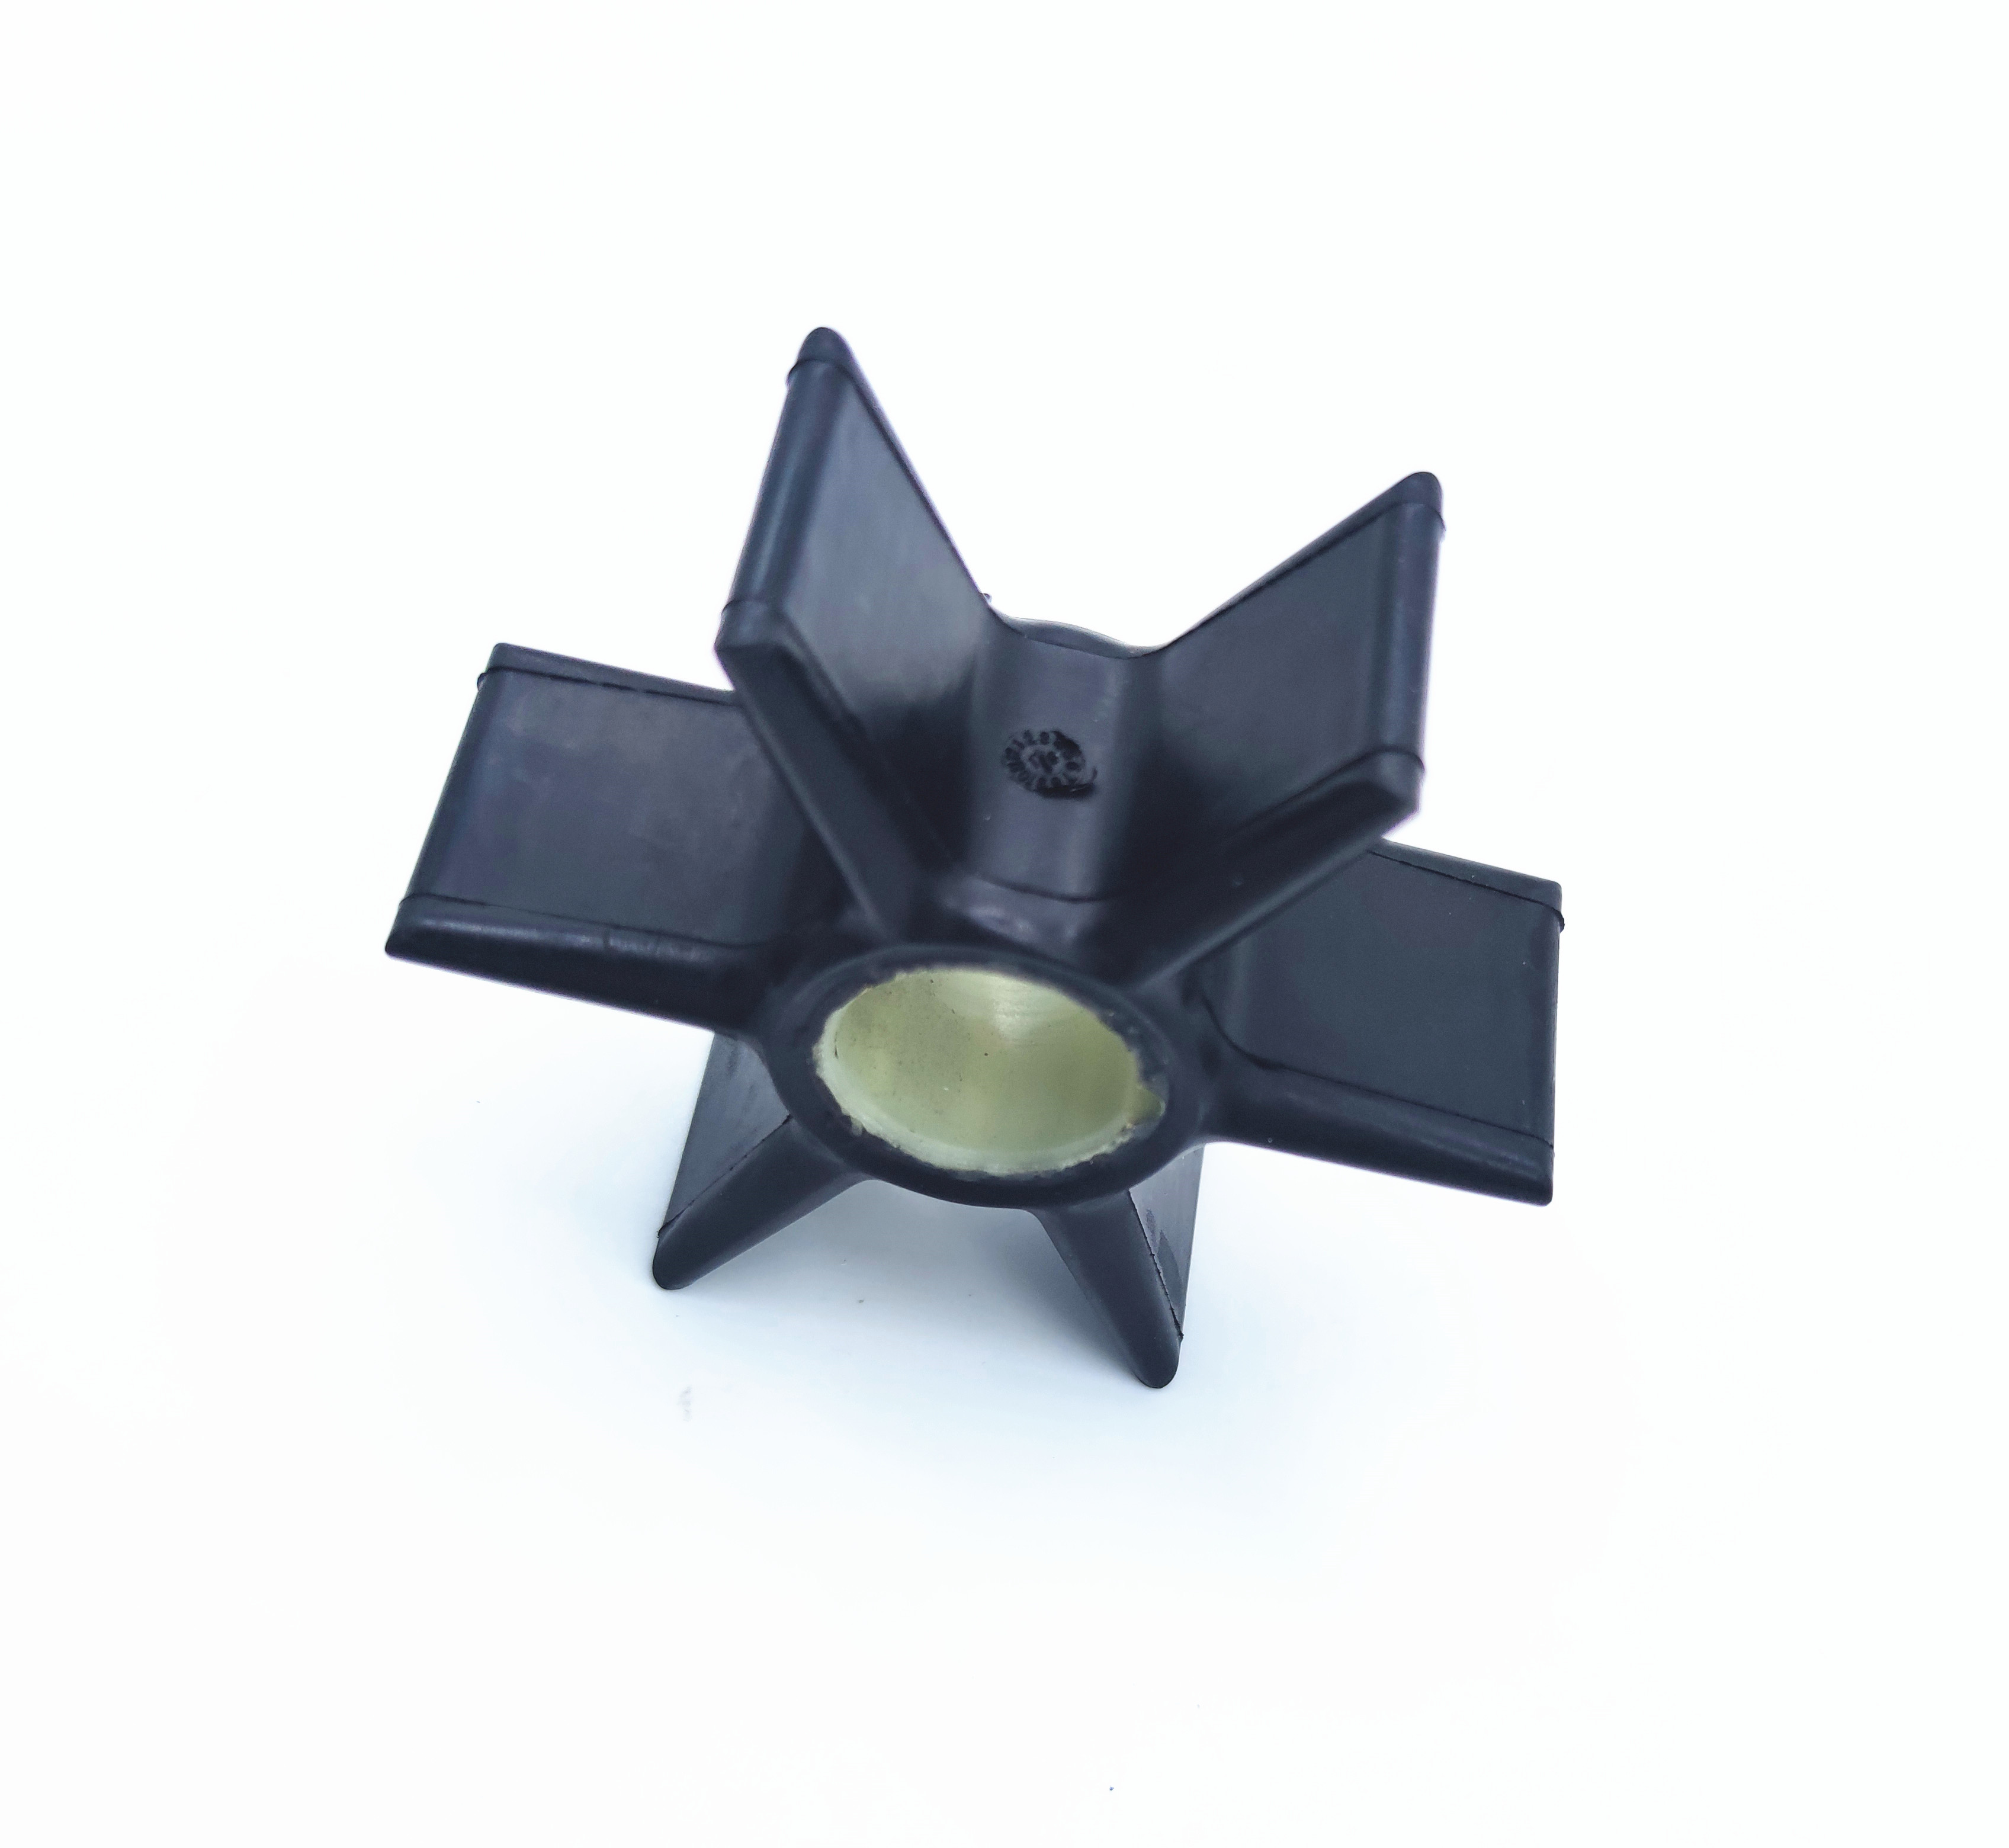 Boat Engines Water Pump Impeller 47-43026T2 47-430262Q02 89630 18-3056 for Force / Mercury Marine O